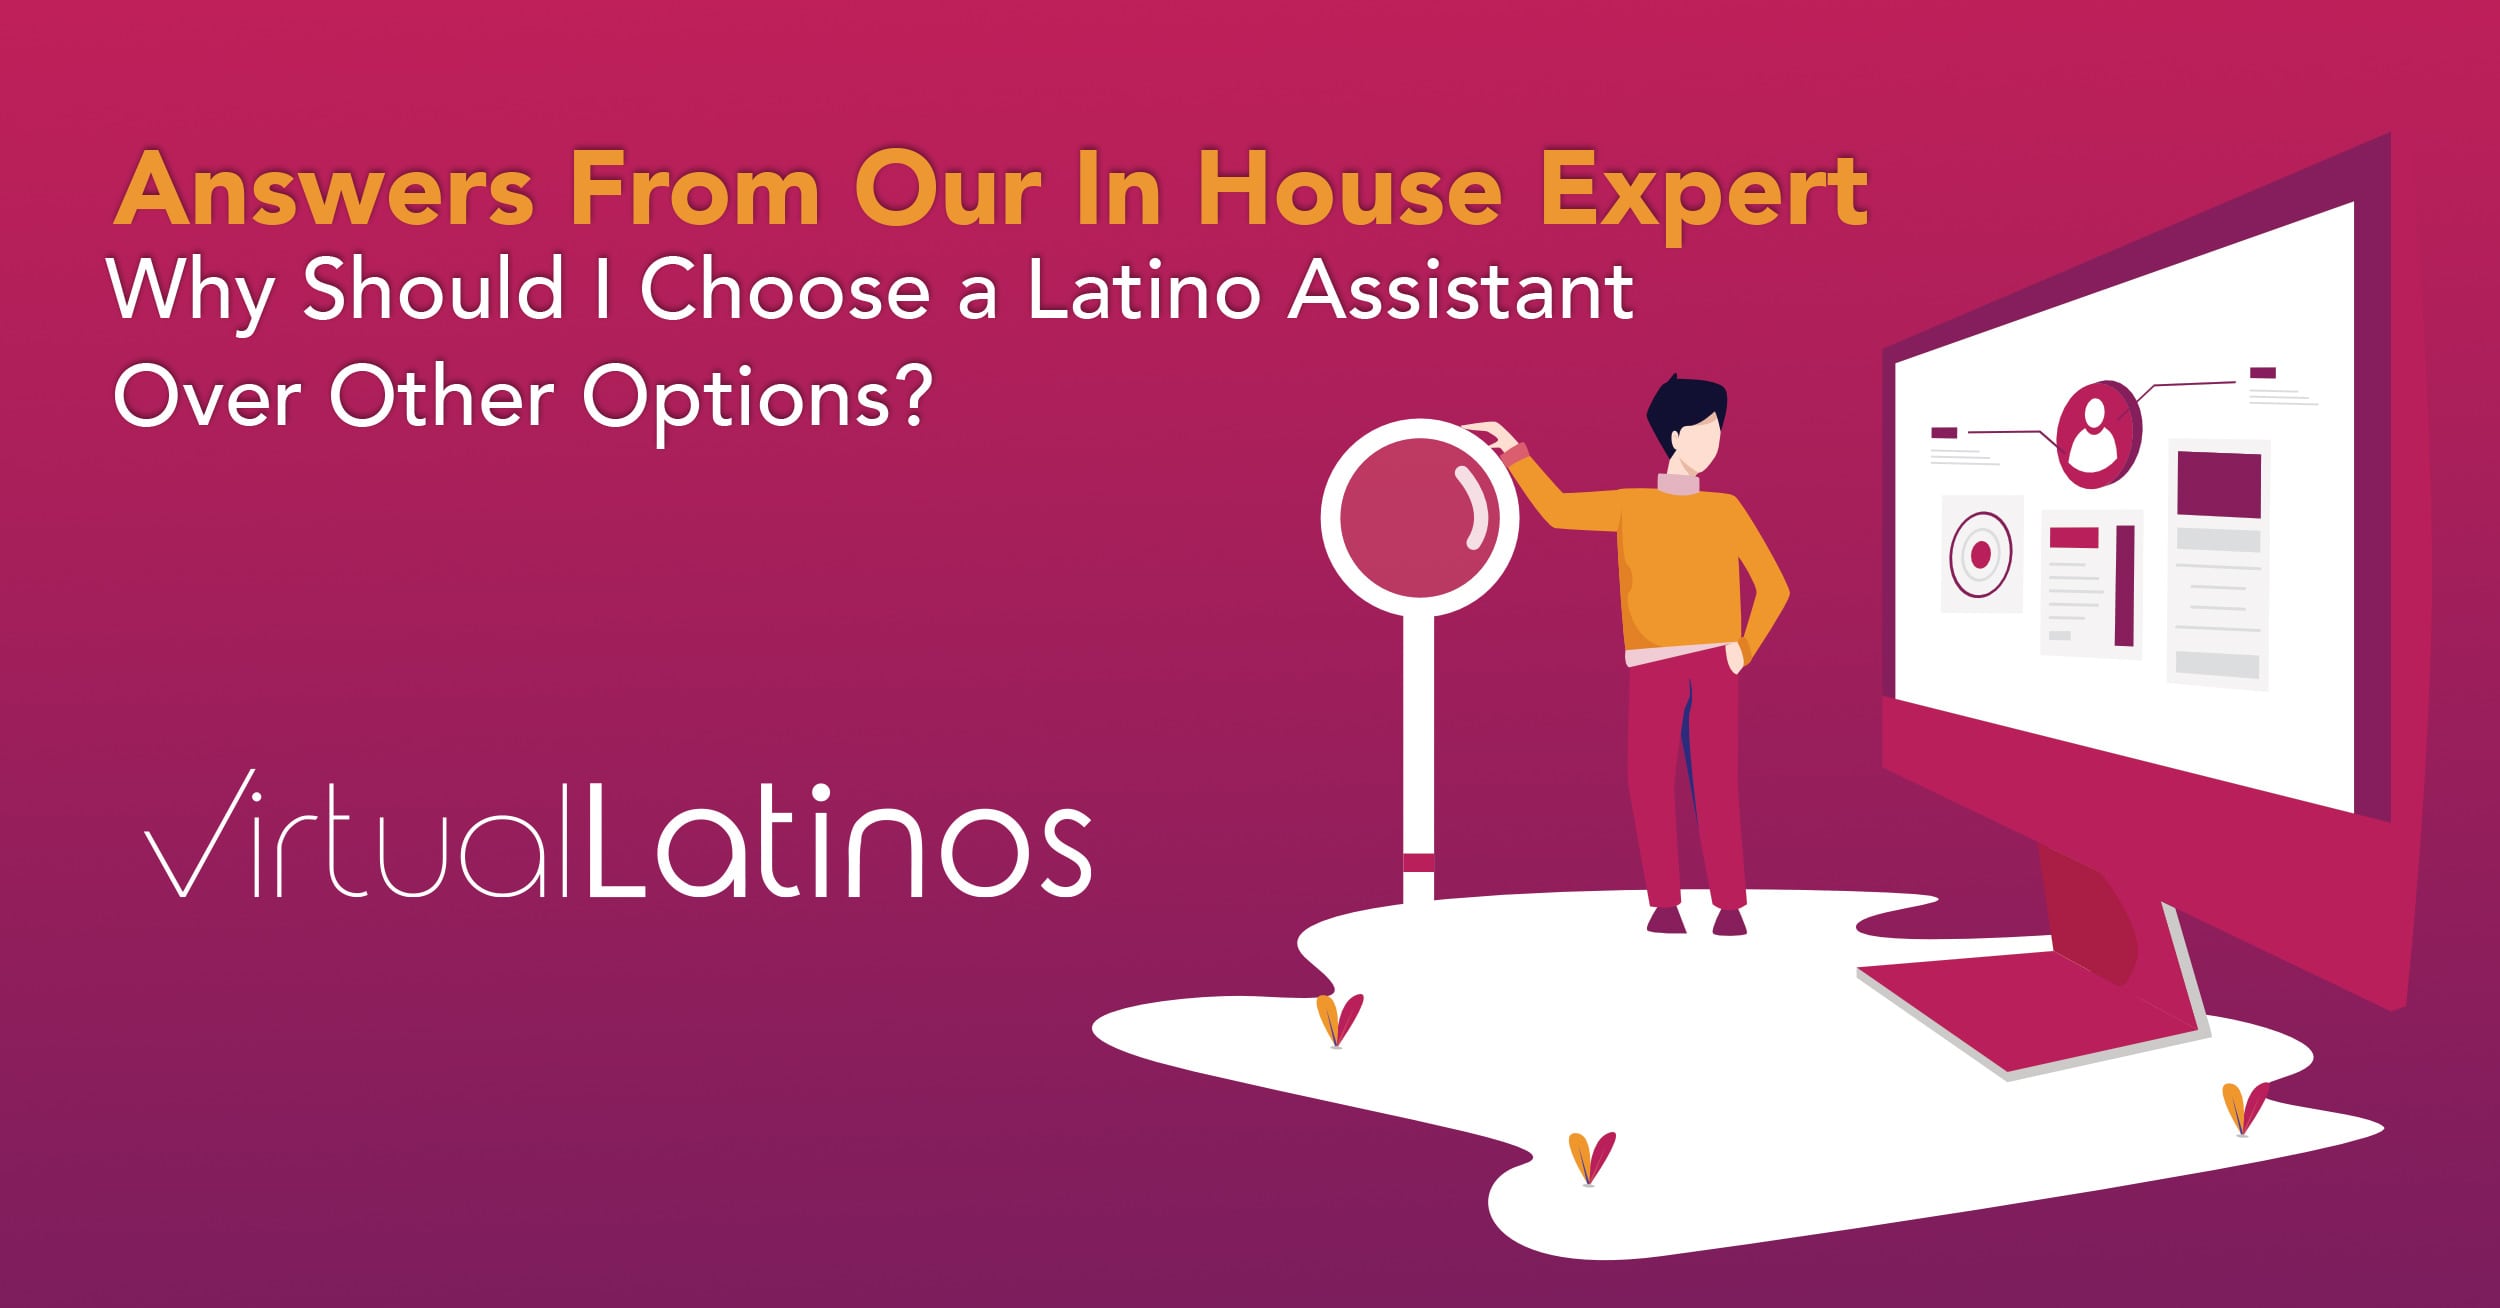 Answers From Our In House Expert: Why Should I Choose A Latino Assistant Over Other Options?